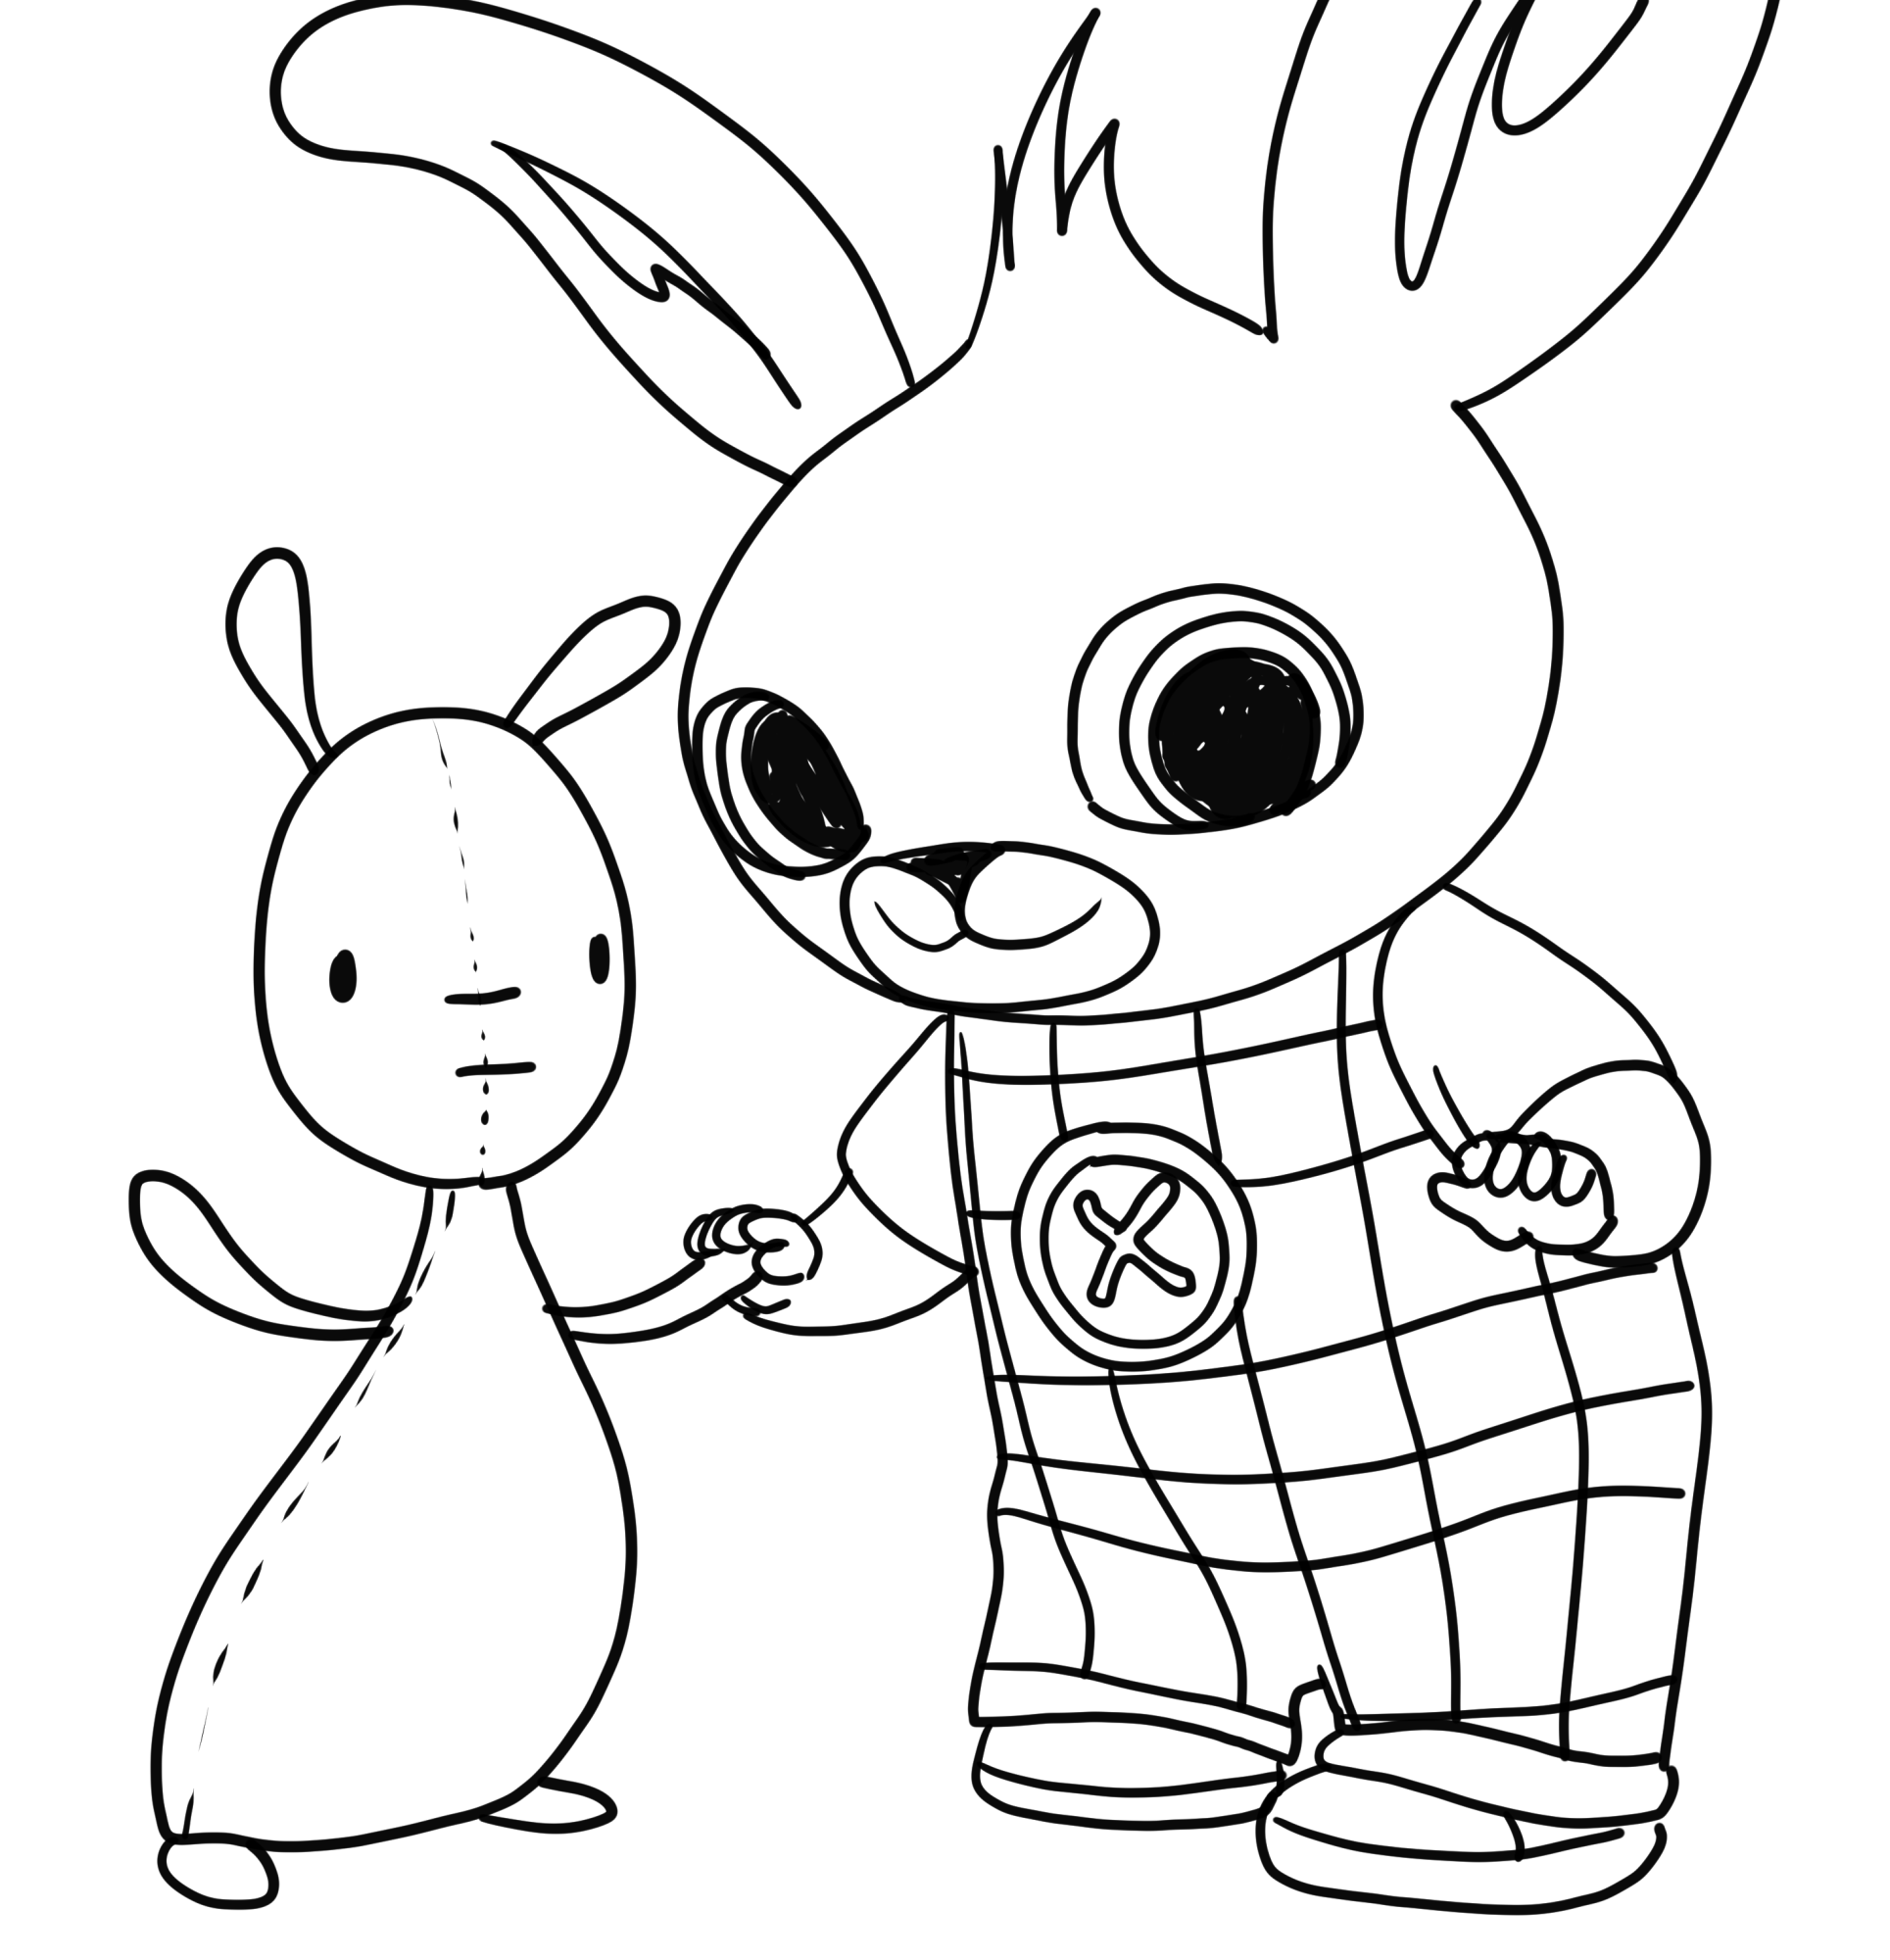 Bing and Flop coloring page